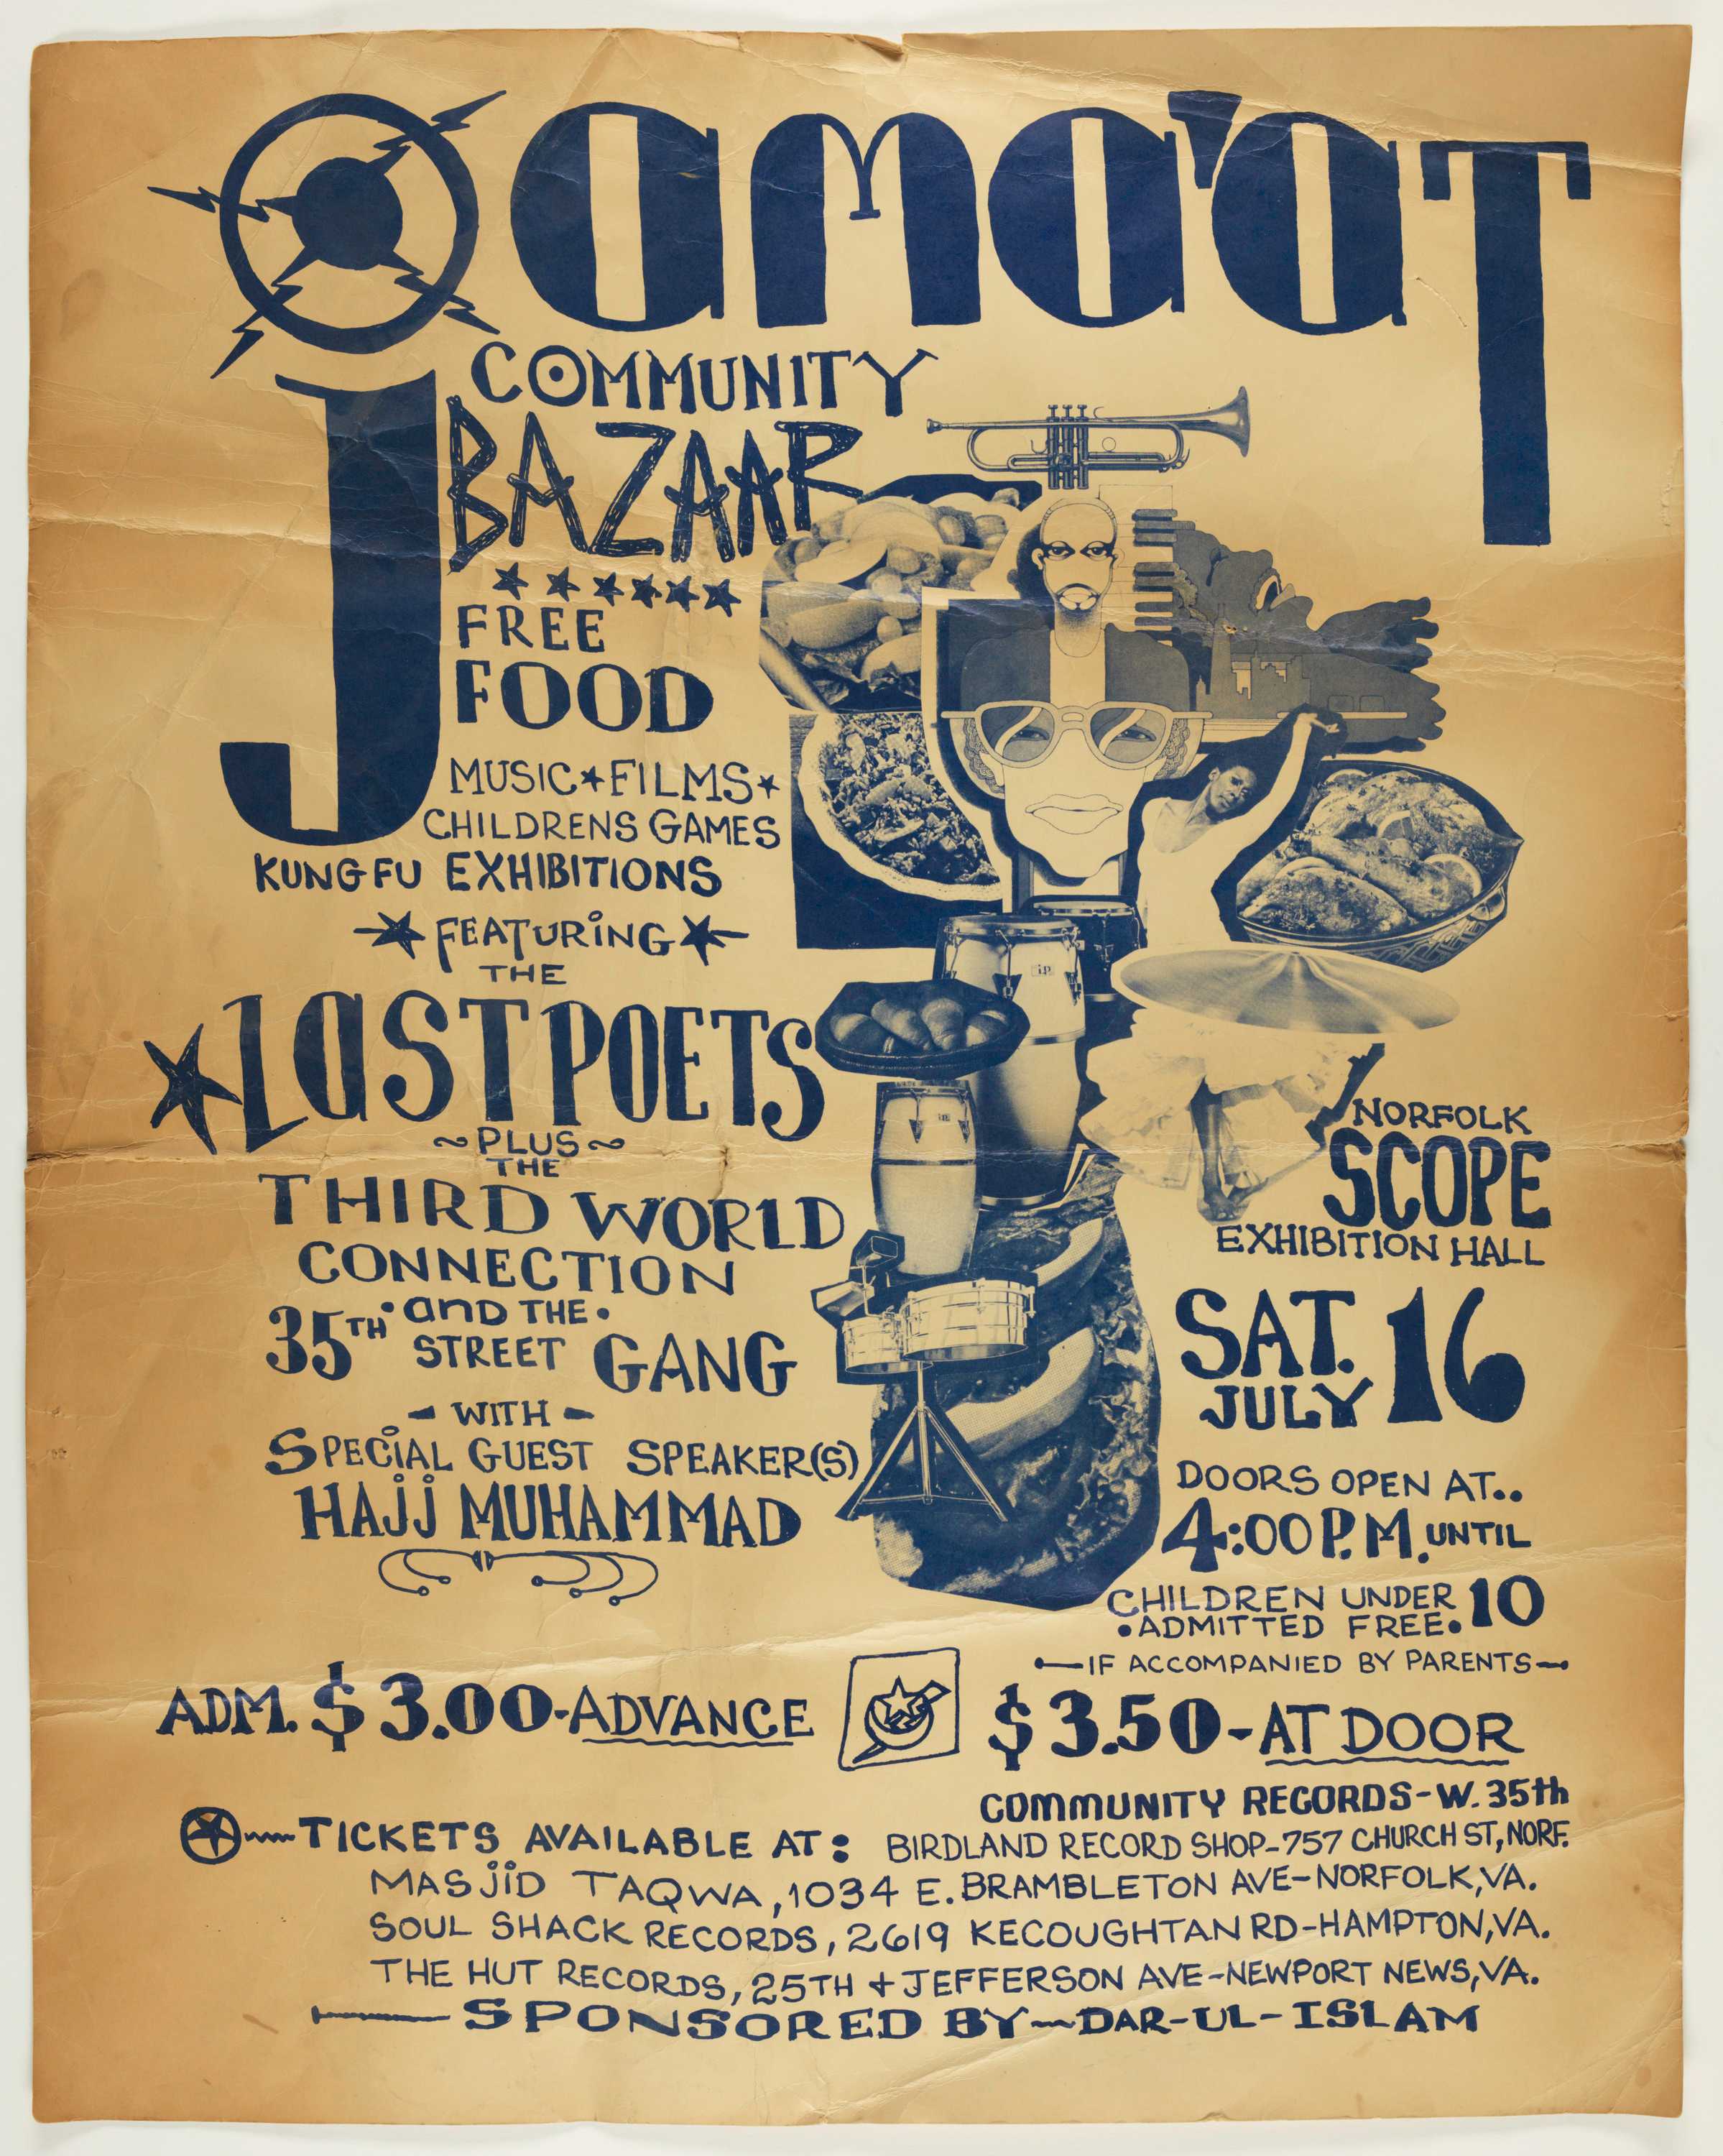 Tan poster with blue type advertising a performance by The Last Poets, in addition to The Third World Connection, The 35th Street Gang, and special guest speaker Hajj Muhammad. The performance is advertised as taking place at the Norfolk Scope Exhibition Hall. The poster include a collage of instruments, people, and other illustrations.